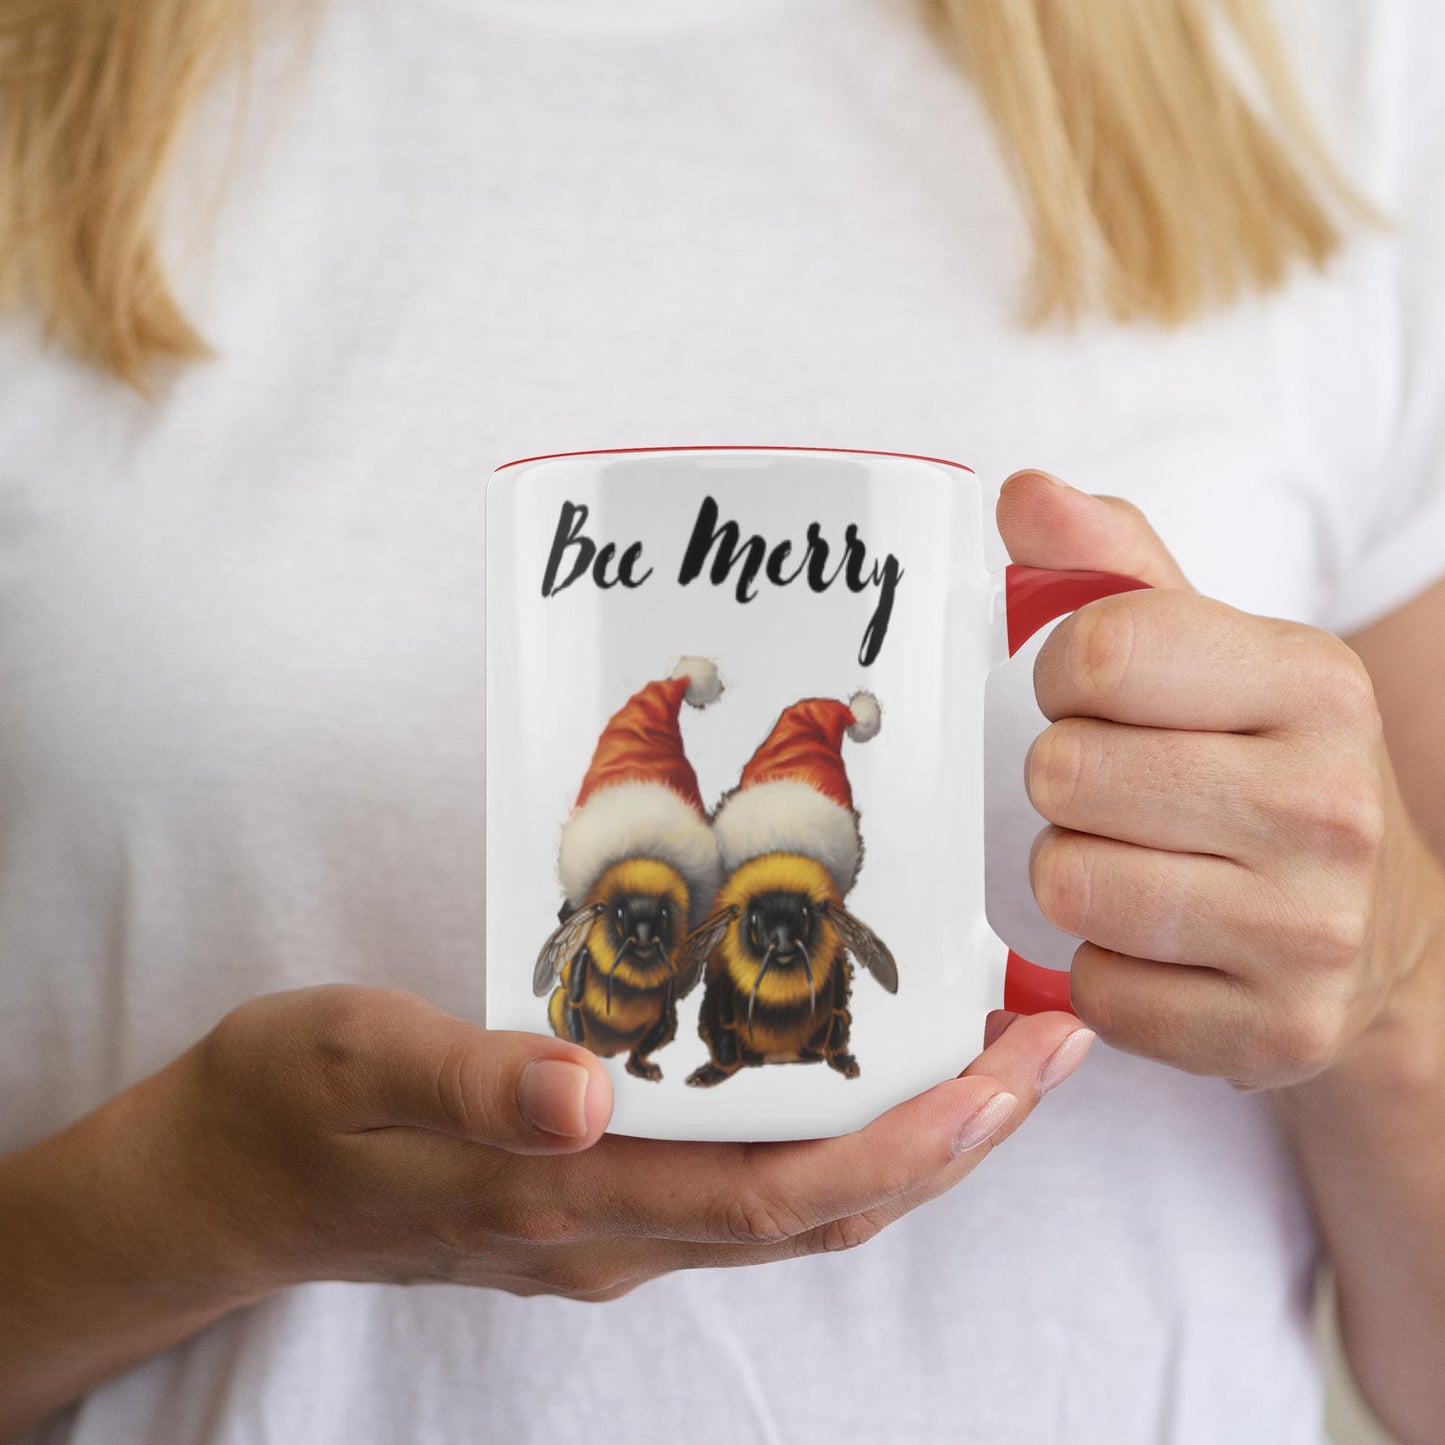 Bee Merry Accent Mug 11 oz White with Red Accents Coffee & Tea Cups gifts holiday store